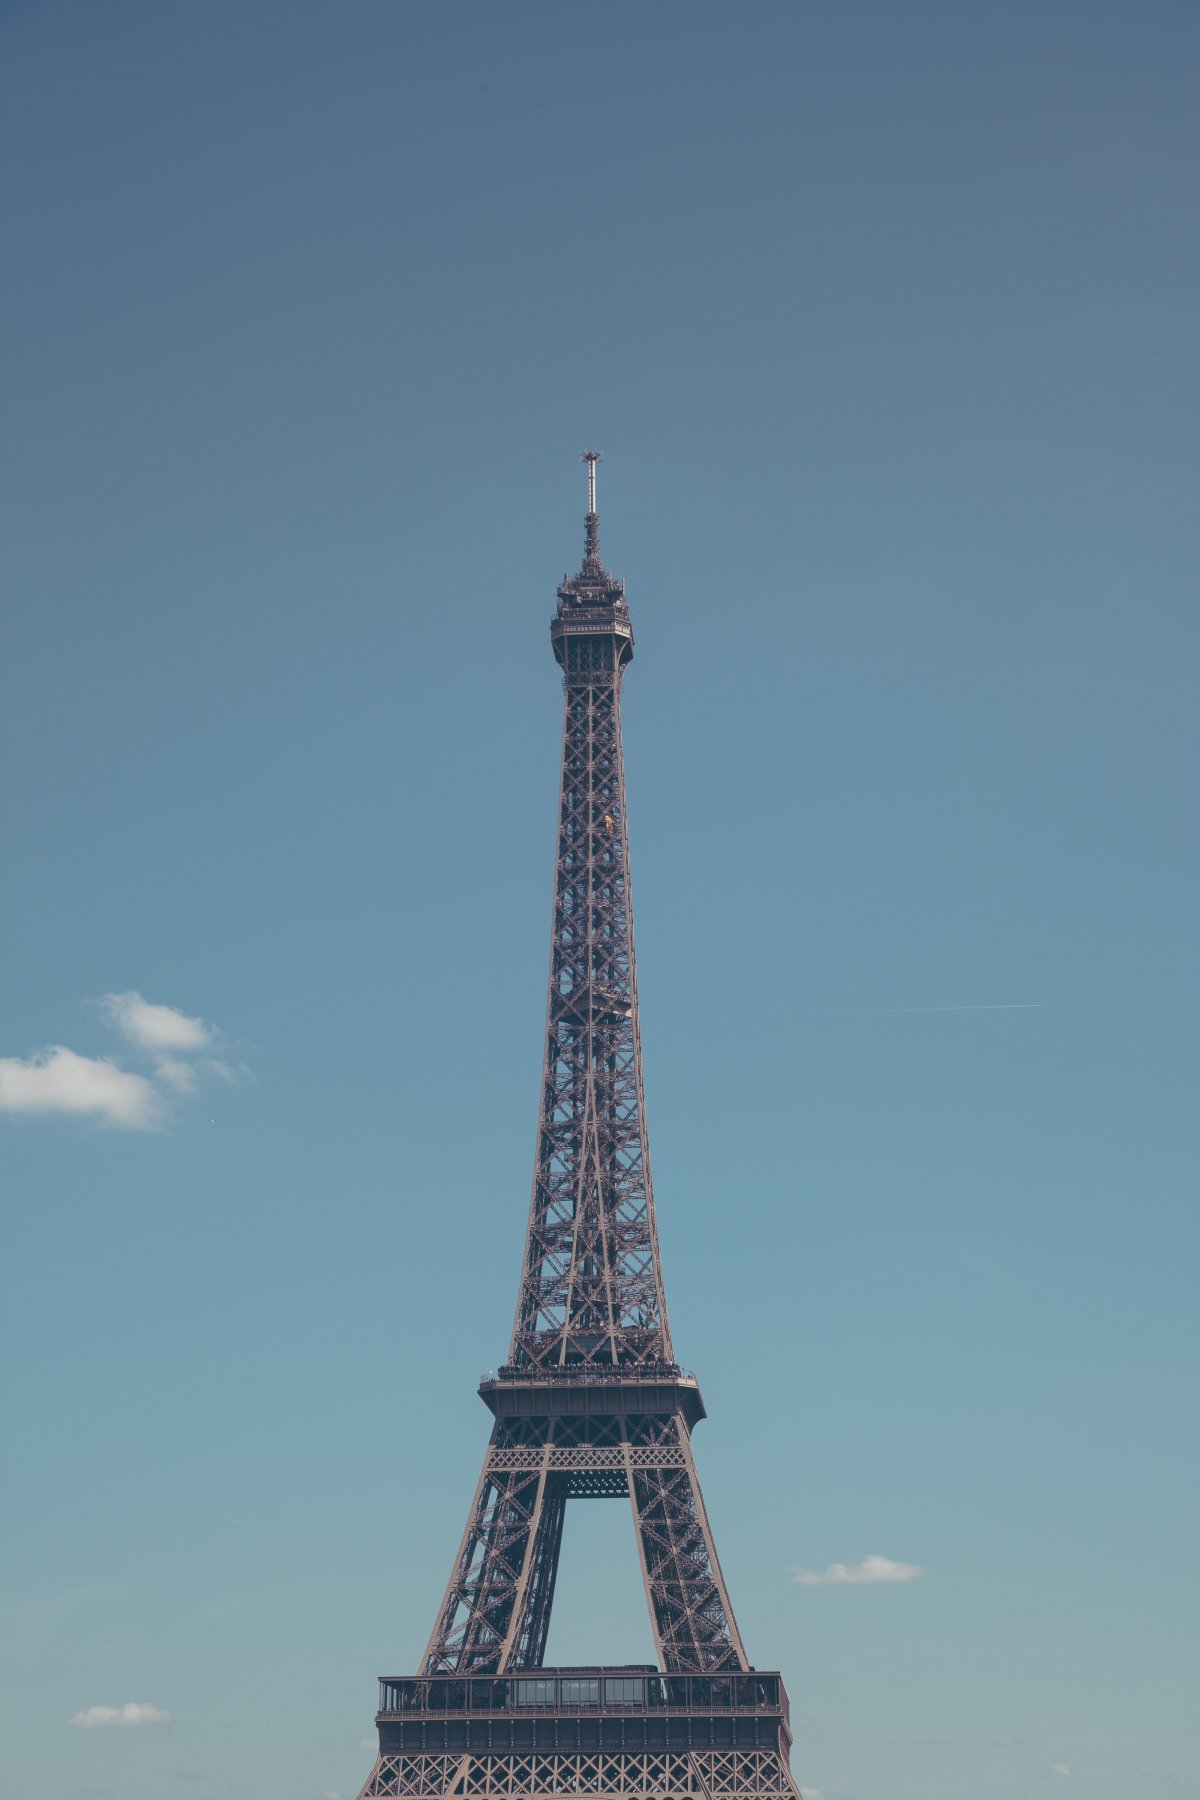 Pictures of the Eiffel Tower from different perspectives